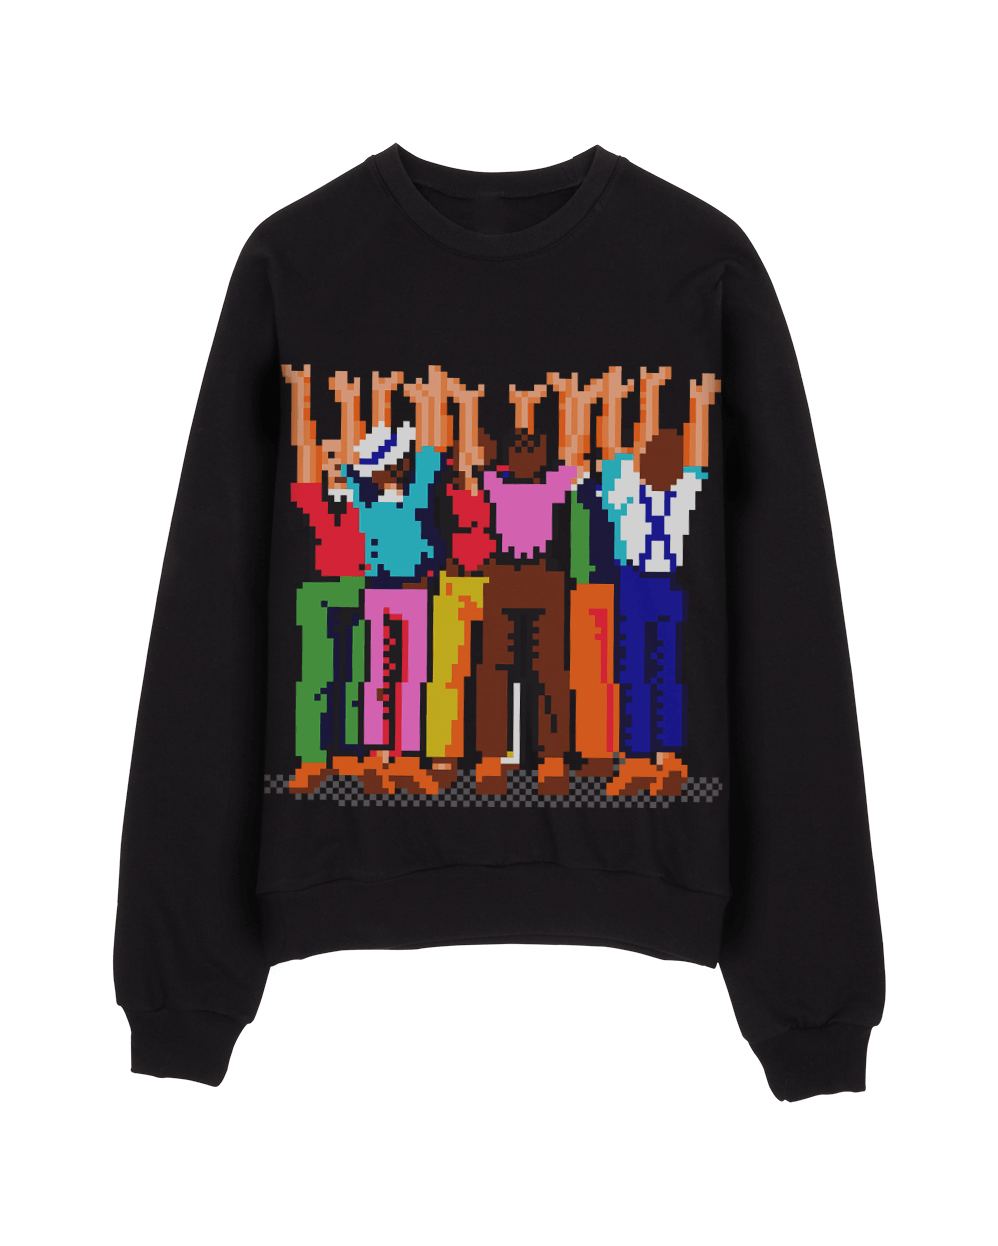 OH LORD® All-Over Sweatshirt (7/7 pieces available) - Kikillo Club